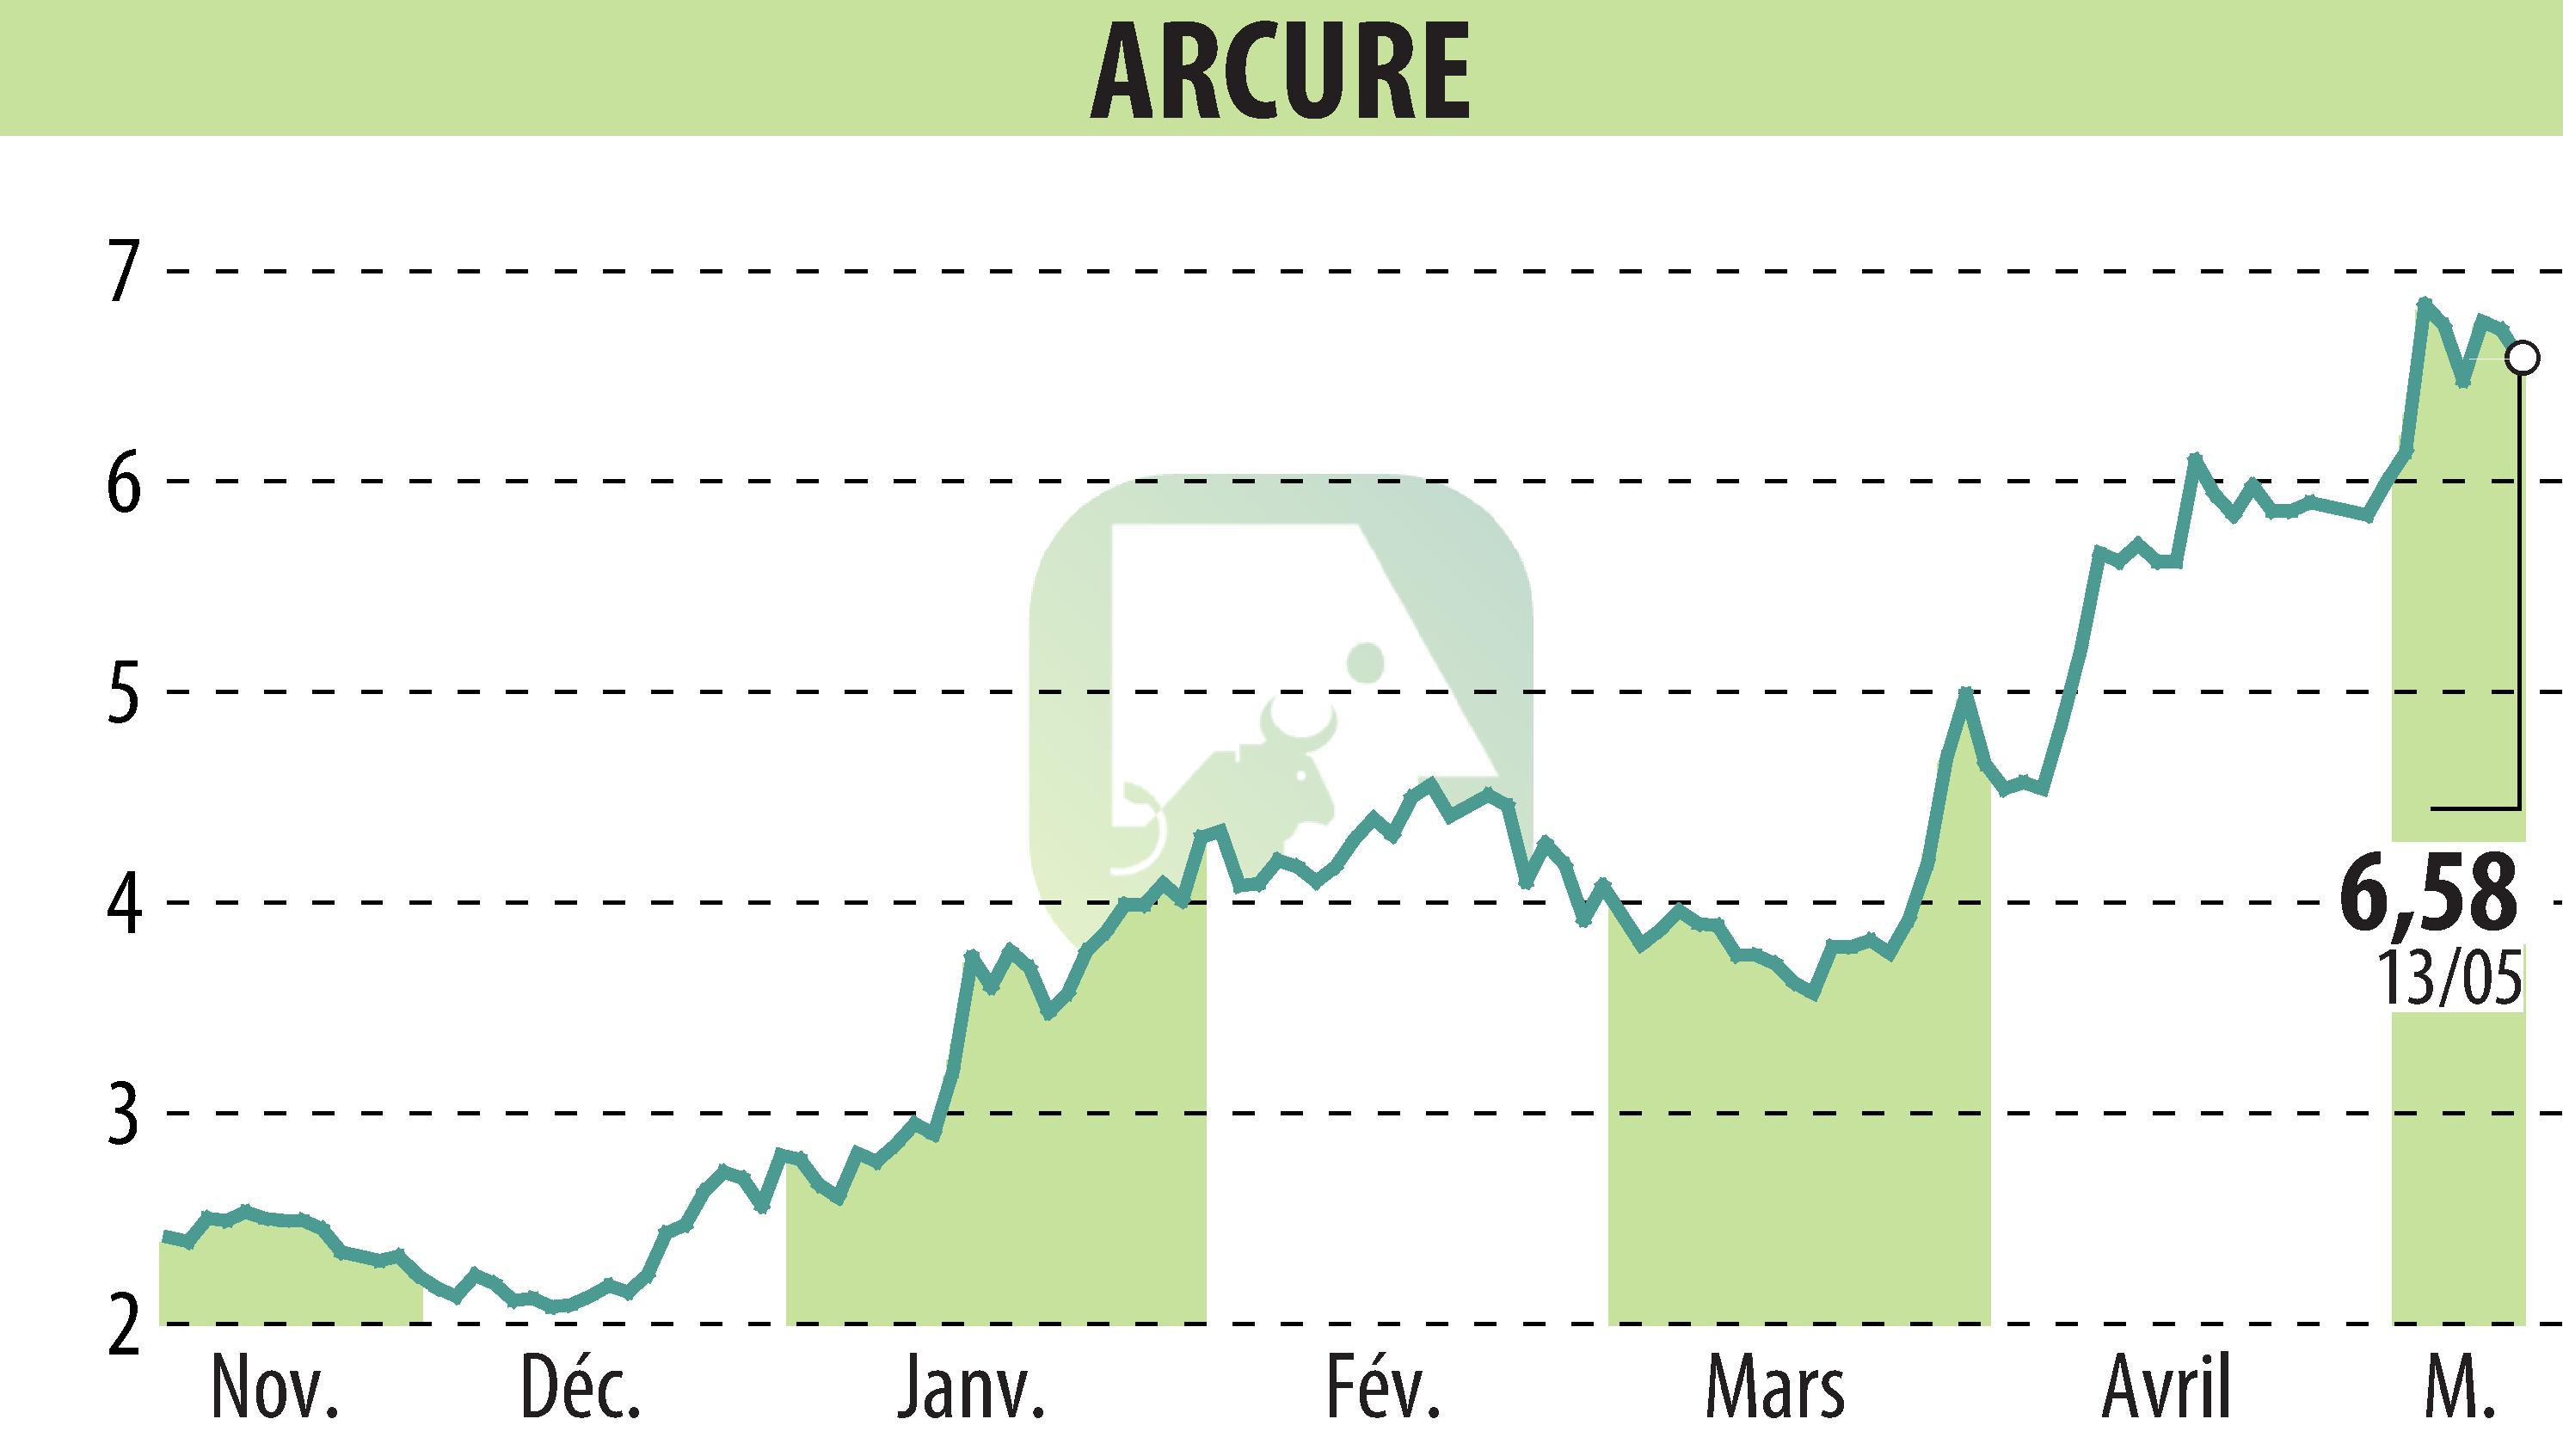 Stock price chart of ARCURE (EPA:ALCUR) showing fluctuations.